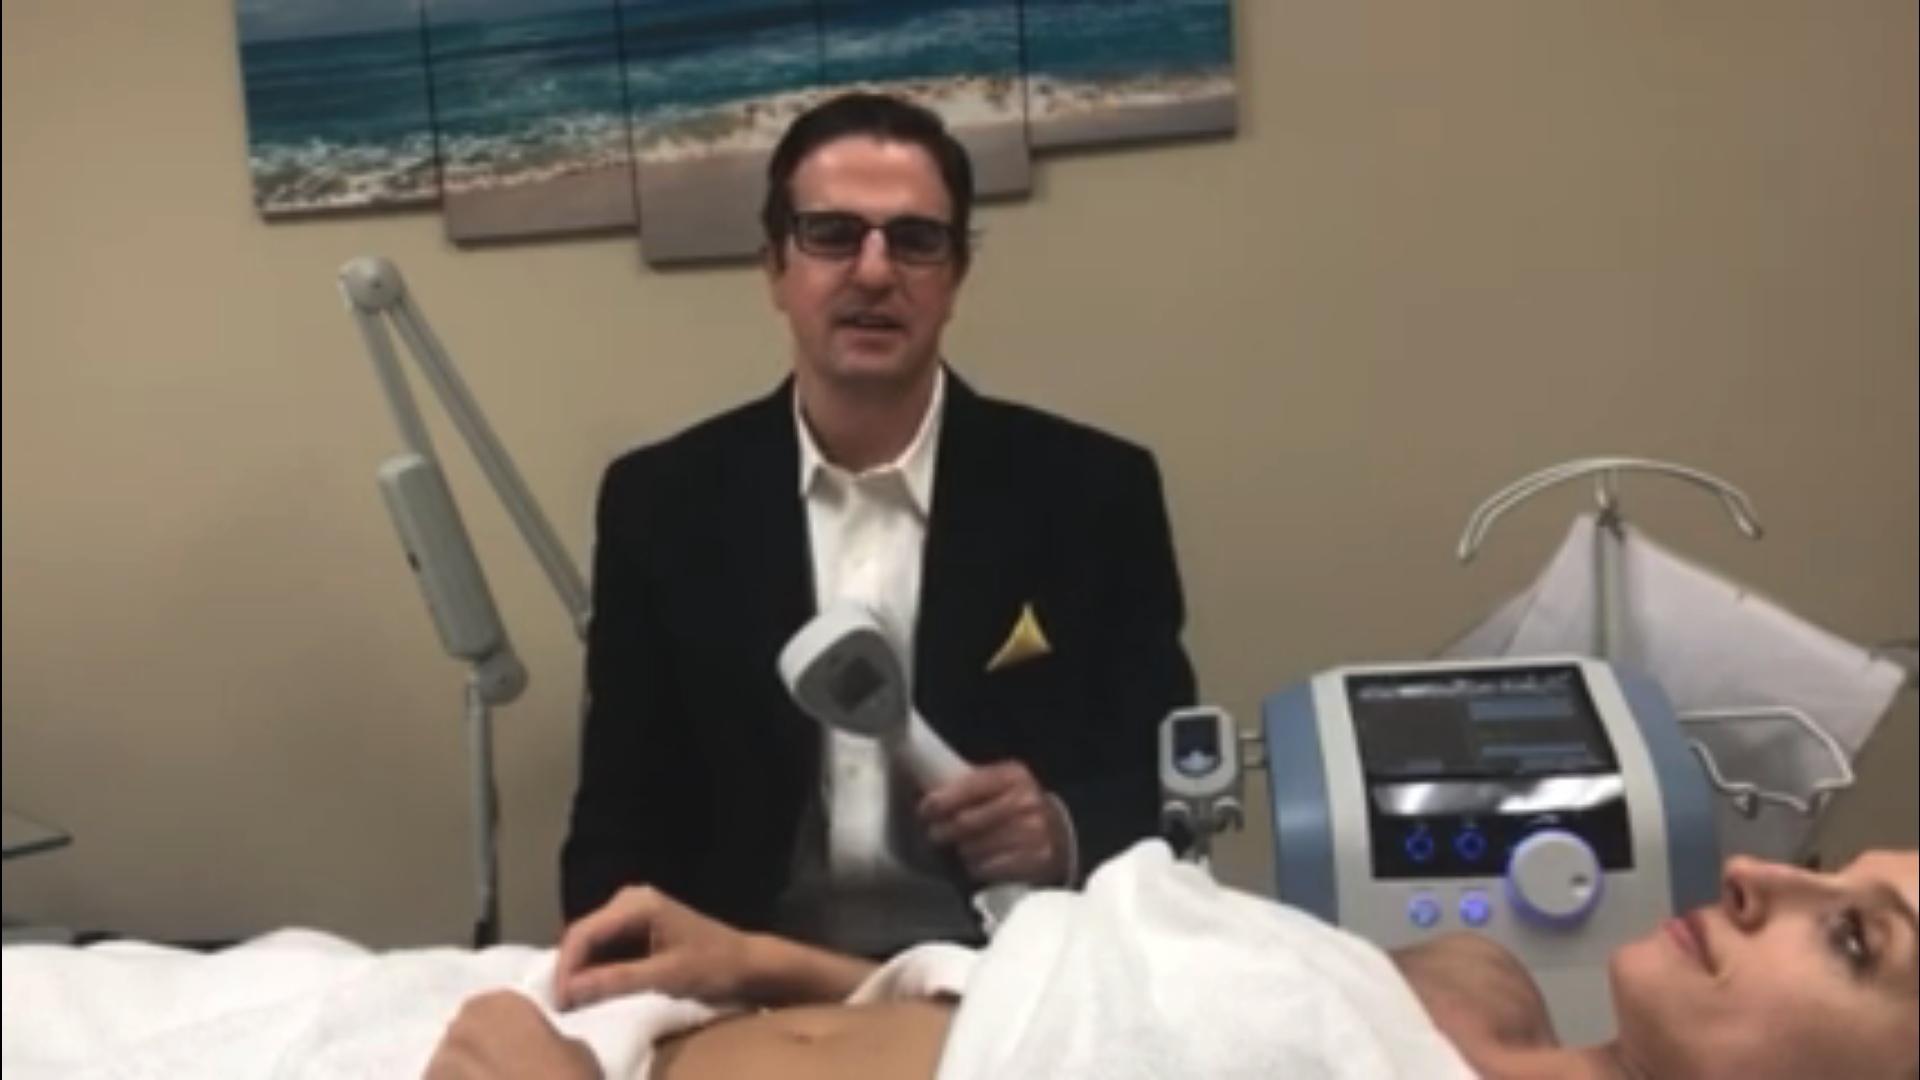 Dr. Wirth holding the Exilis device with a patient laying next to him